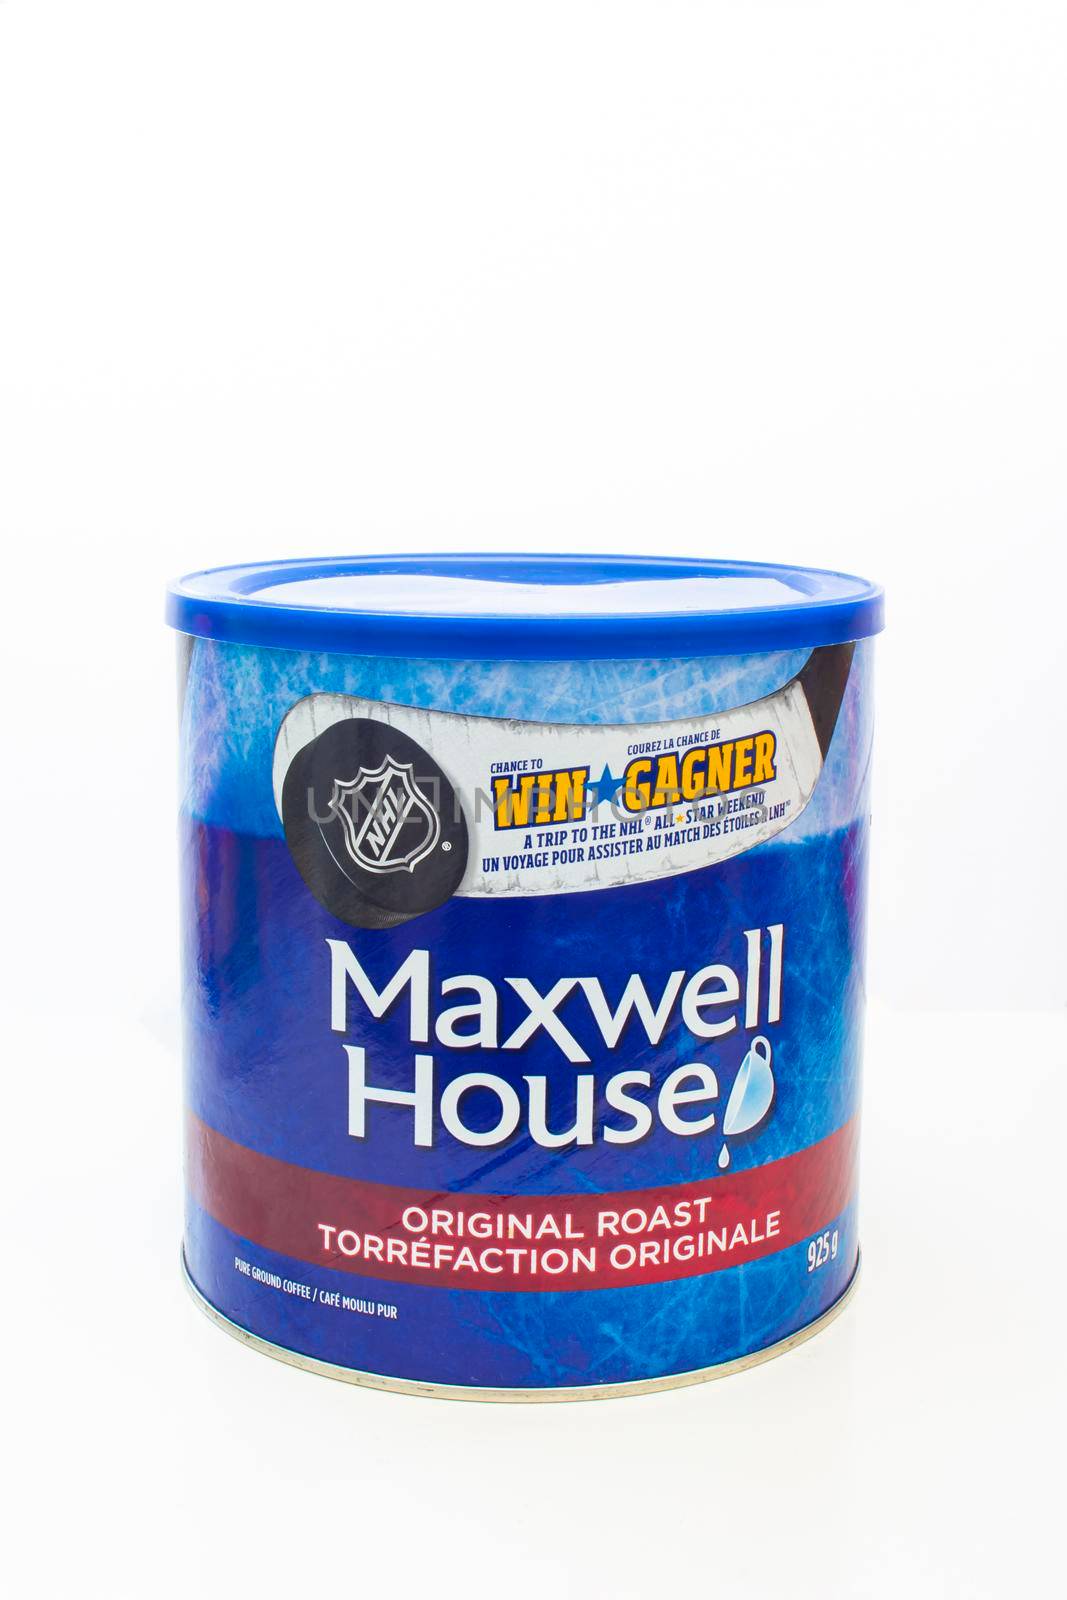 Calgary, Alberta, Canada. April 14, 2021. Maxwell House Original Roast, Fine Grind Coffee, 925g Can on a clear background. by oasisamuel